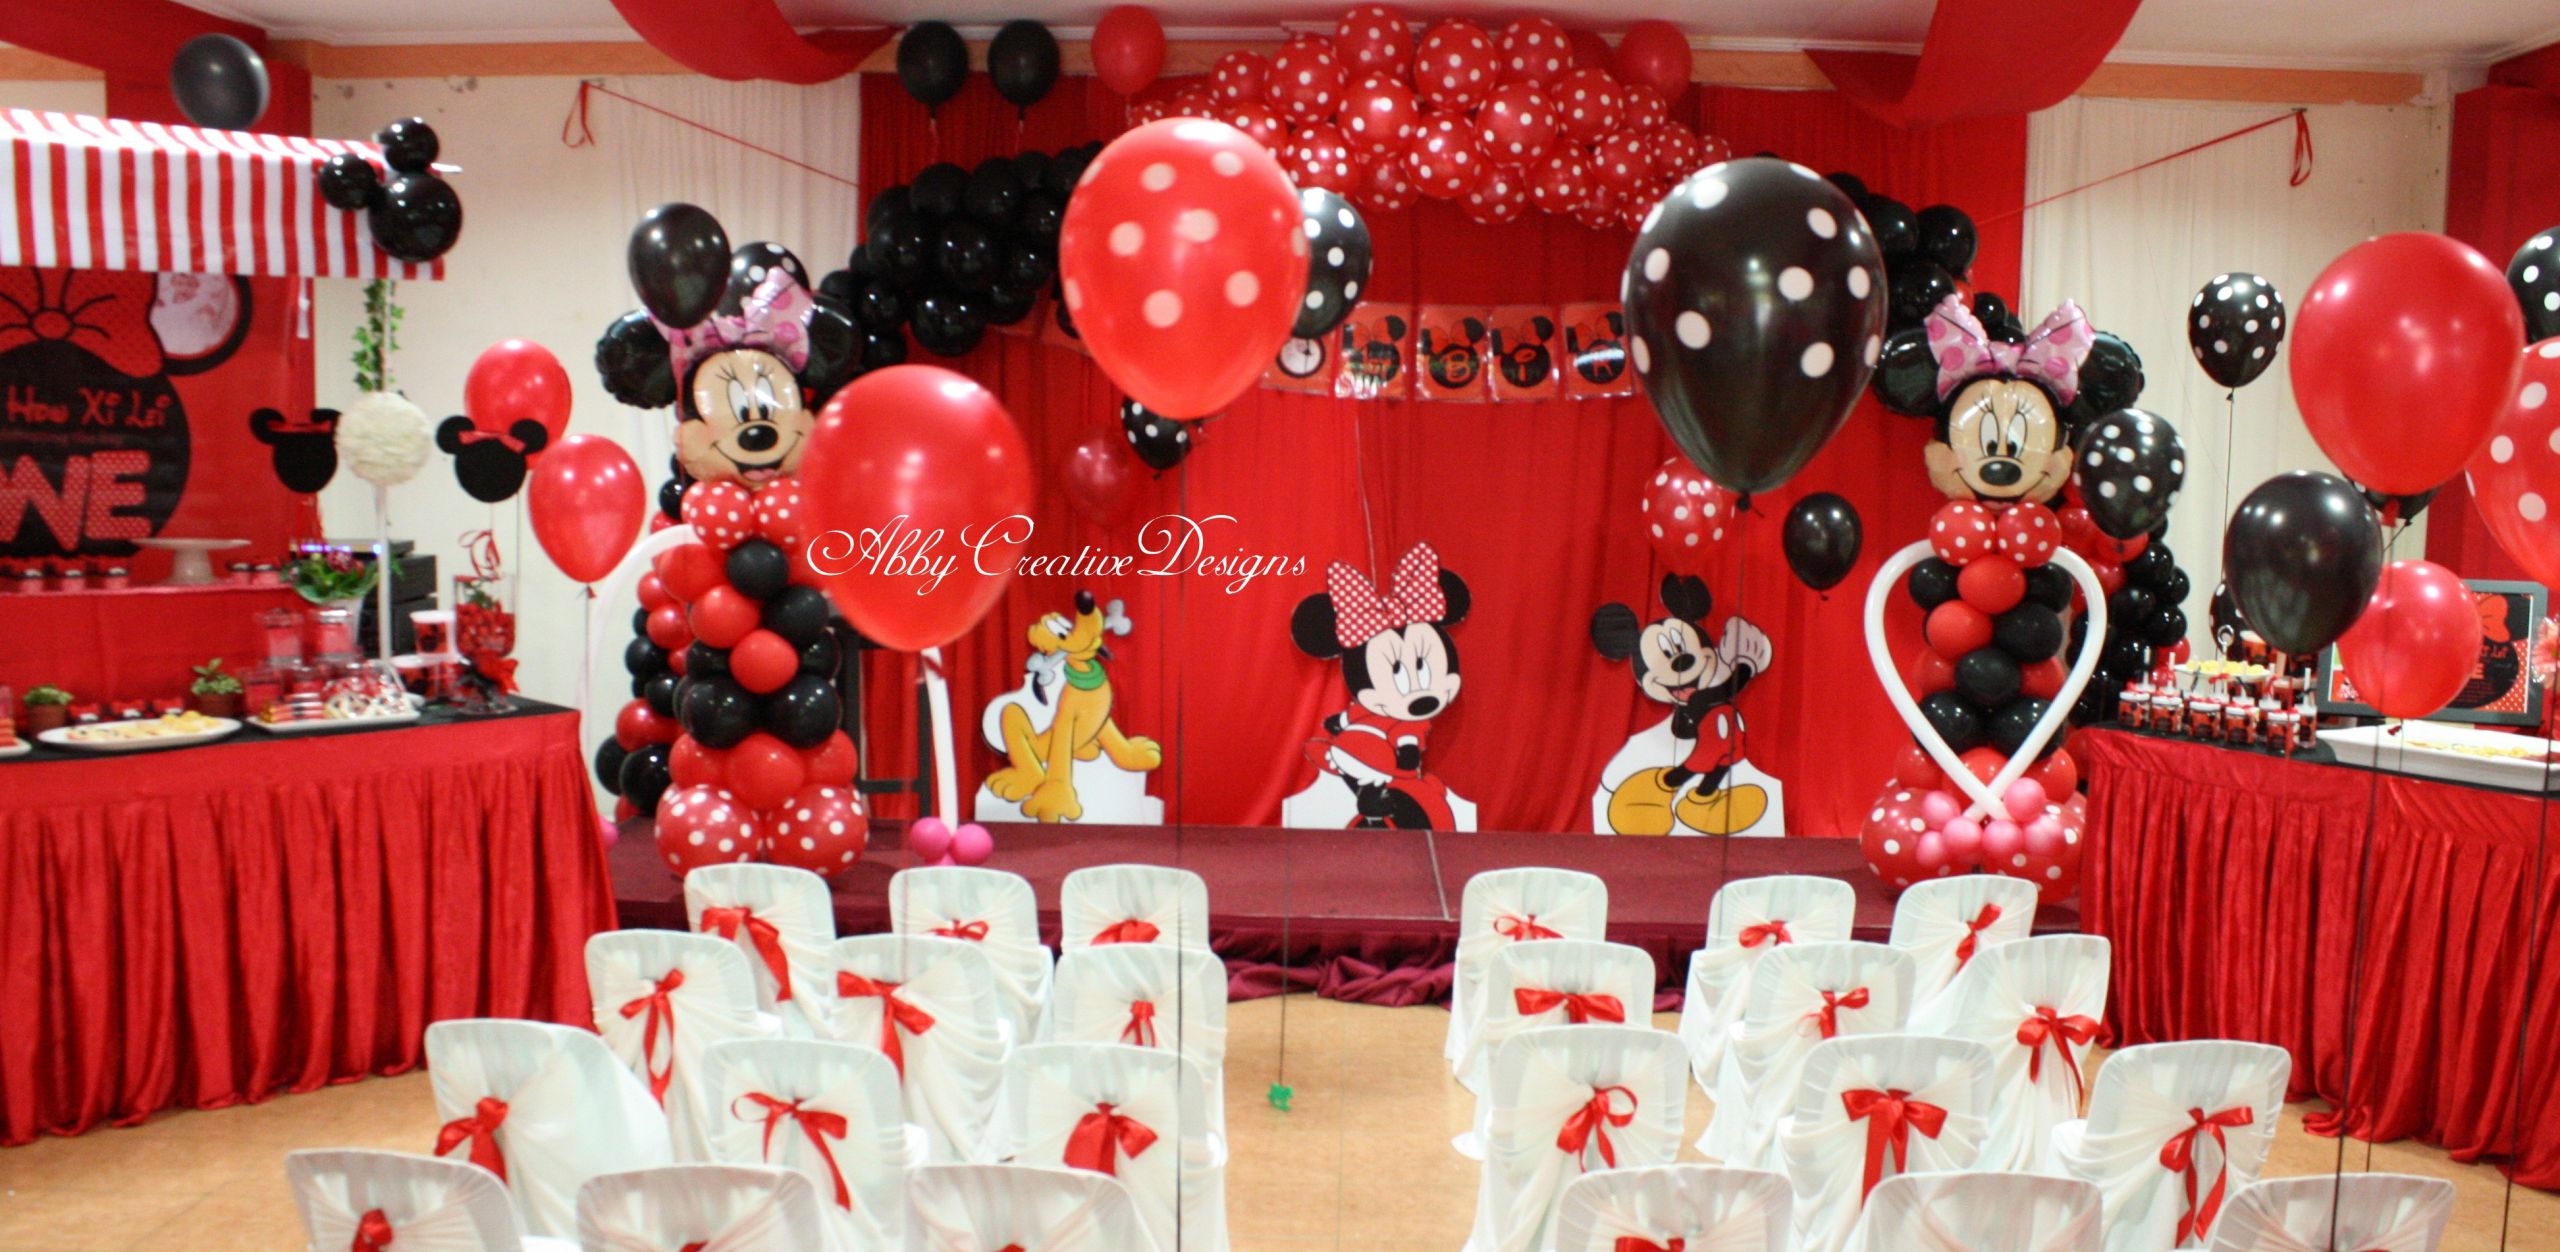 Minnie Mouse First Birthday Party Ideas
 Minnie Mouse 1st Birthday Party